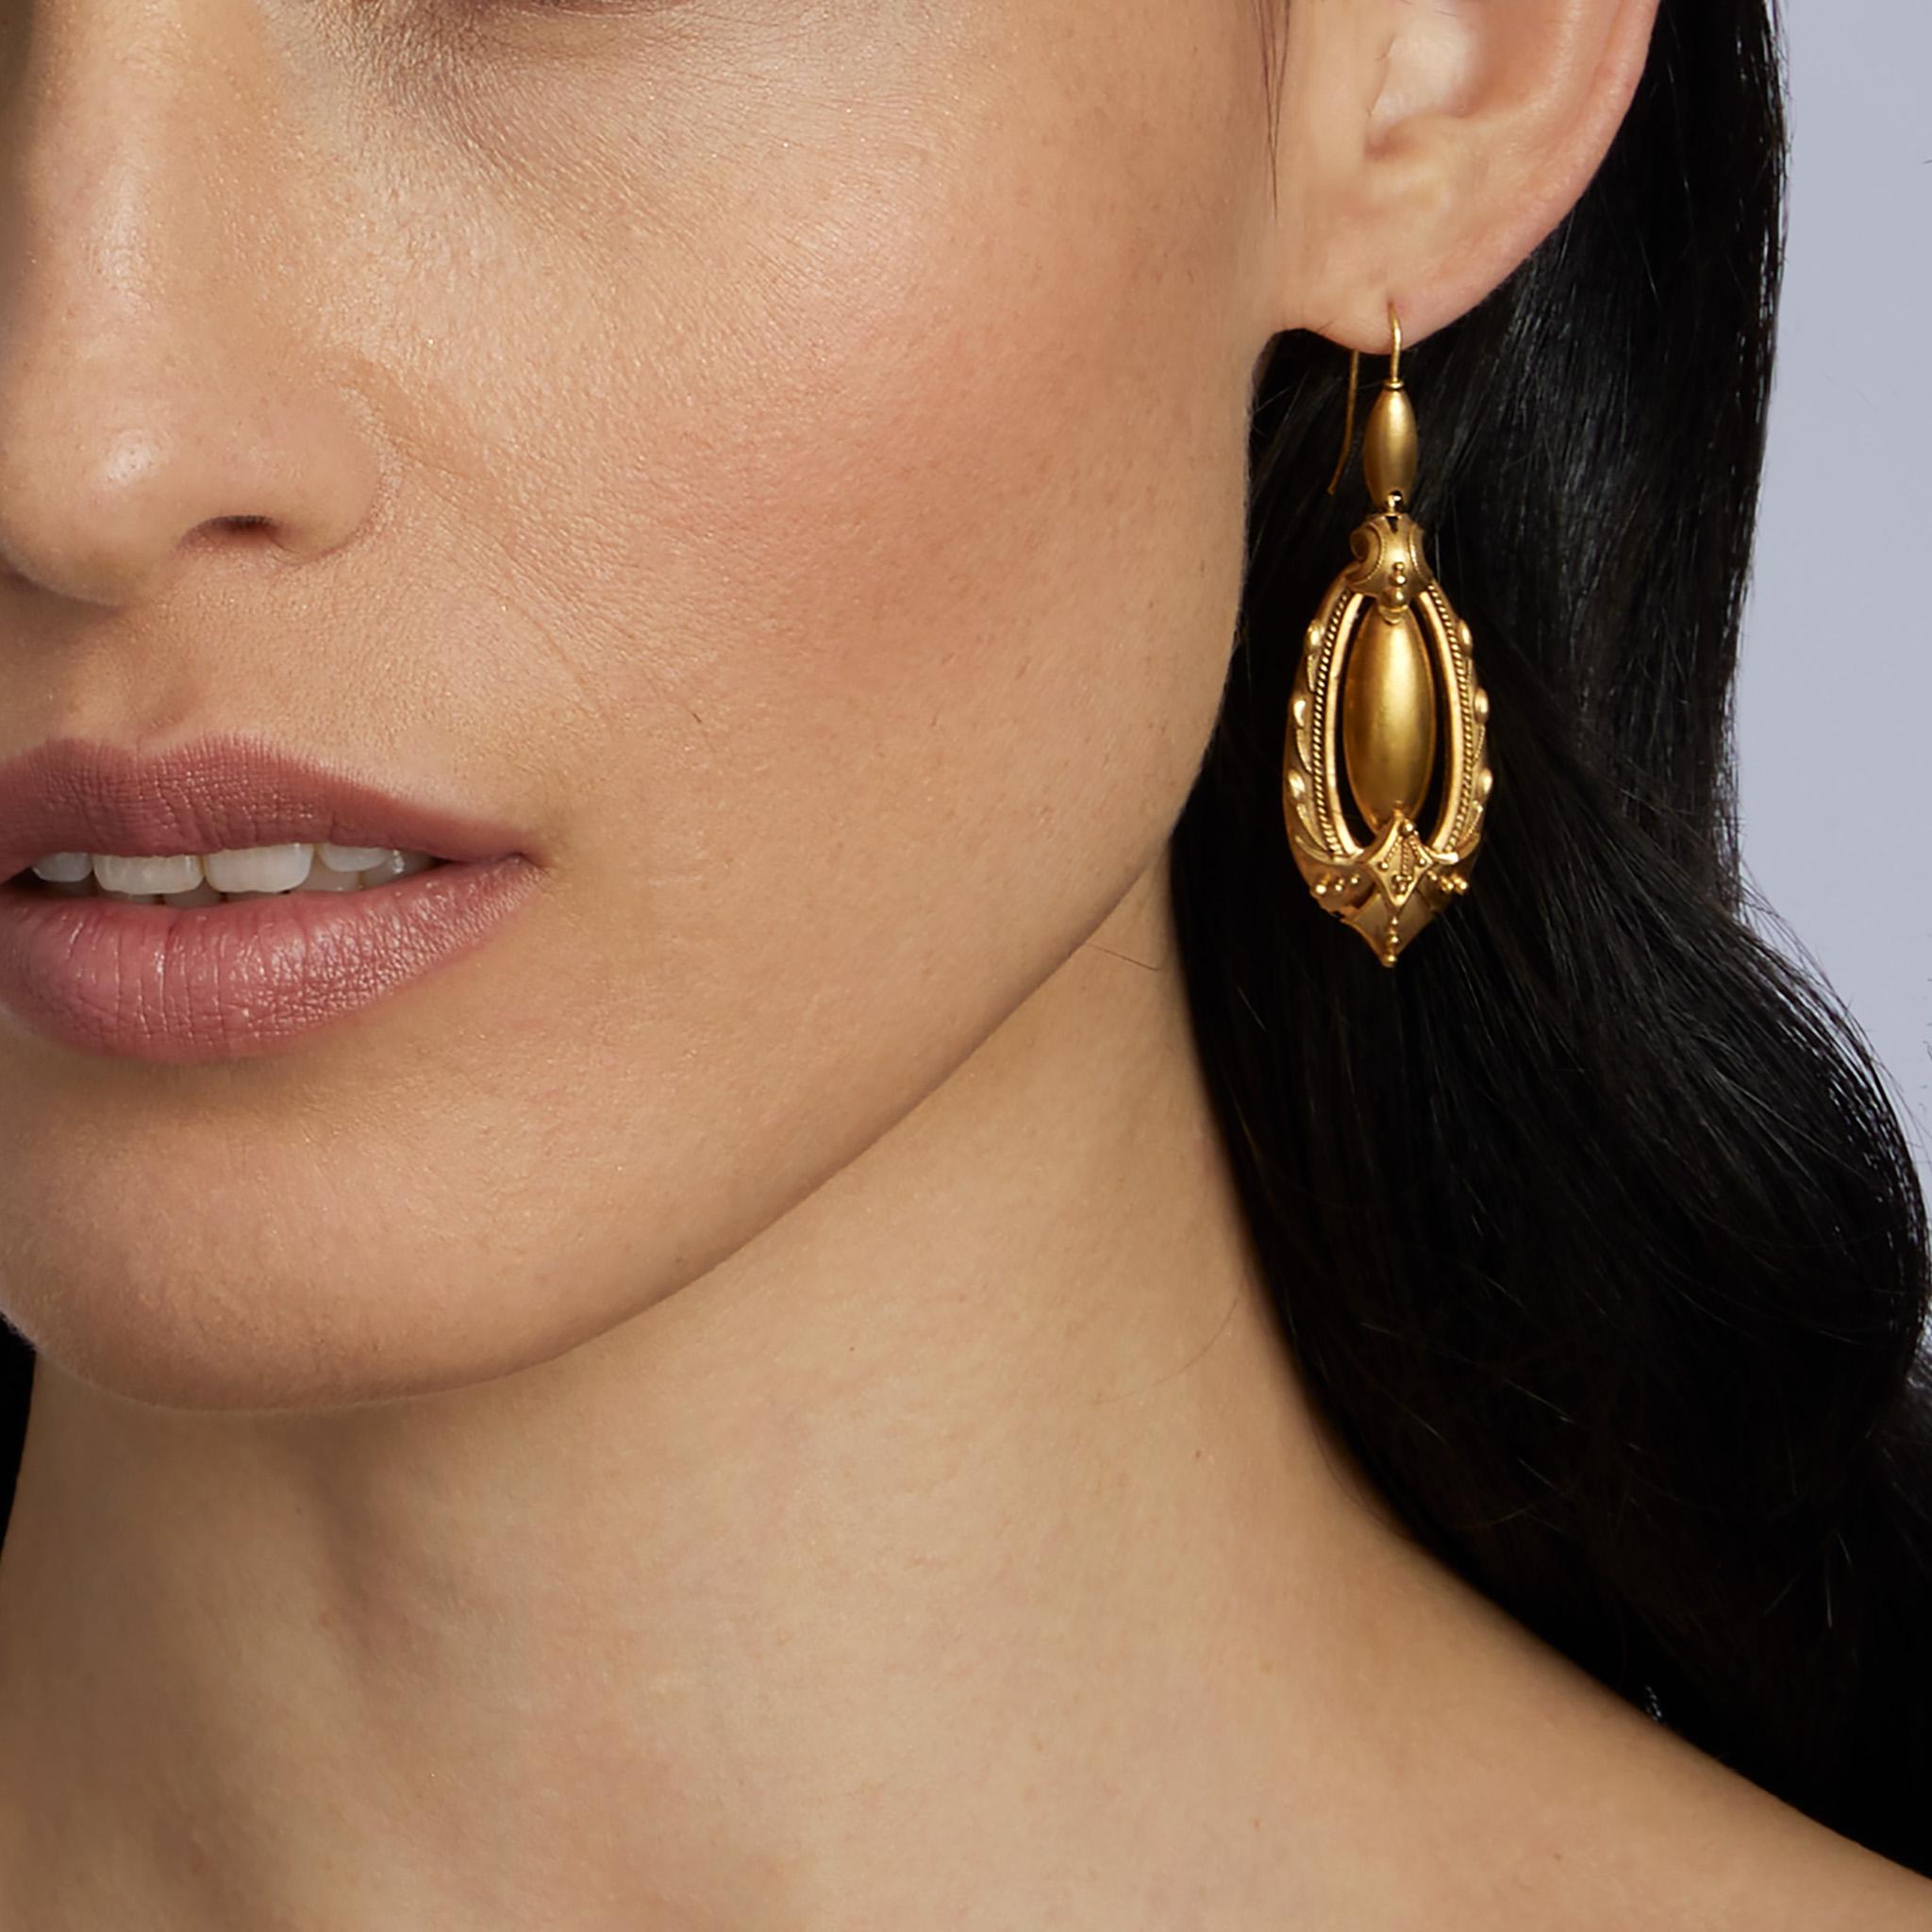 Created in the 1870s, these Victorian pendant earrings are composed of 15K gold. Each pendant earring is designed as an elongated domed oval and hoop with scroll, applied bead and wire motifs, centering a flexibly-set fully rounded oval drop.